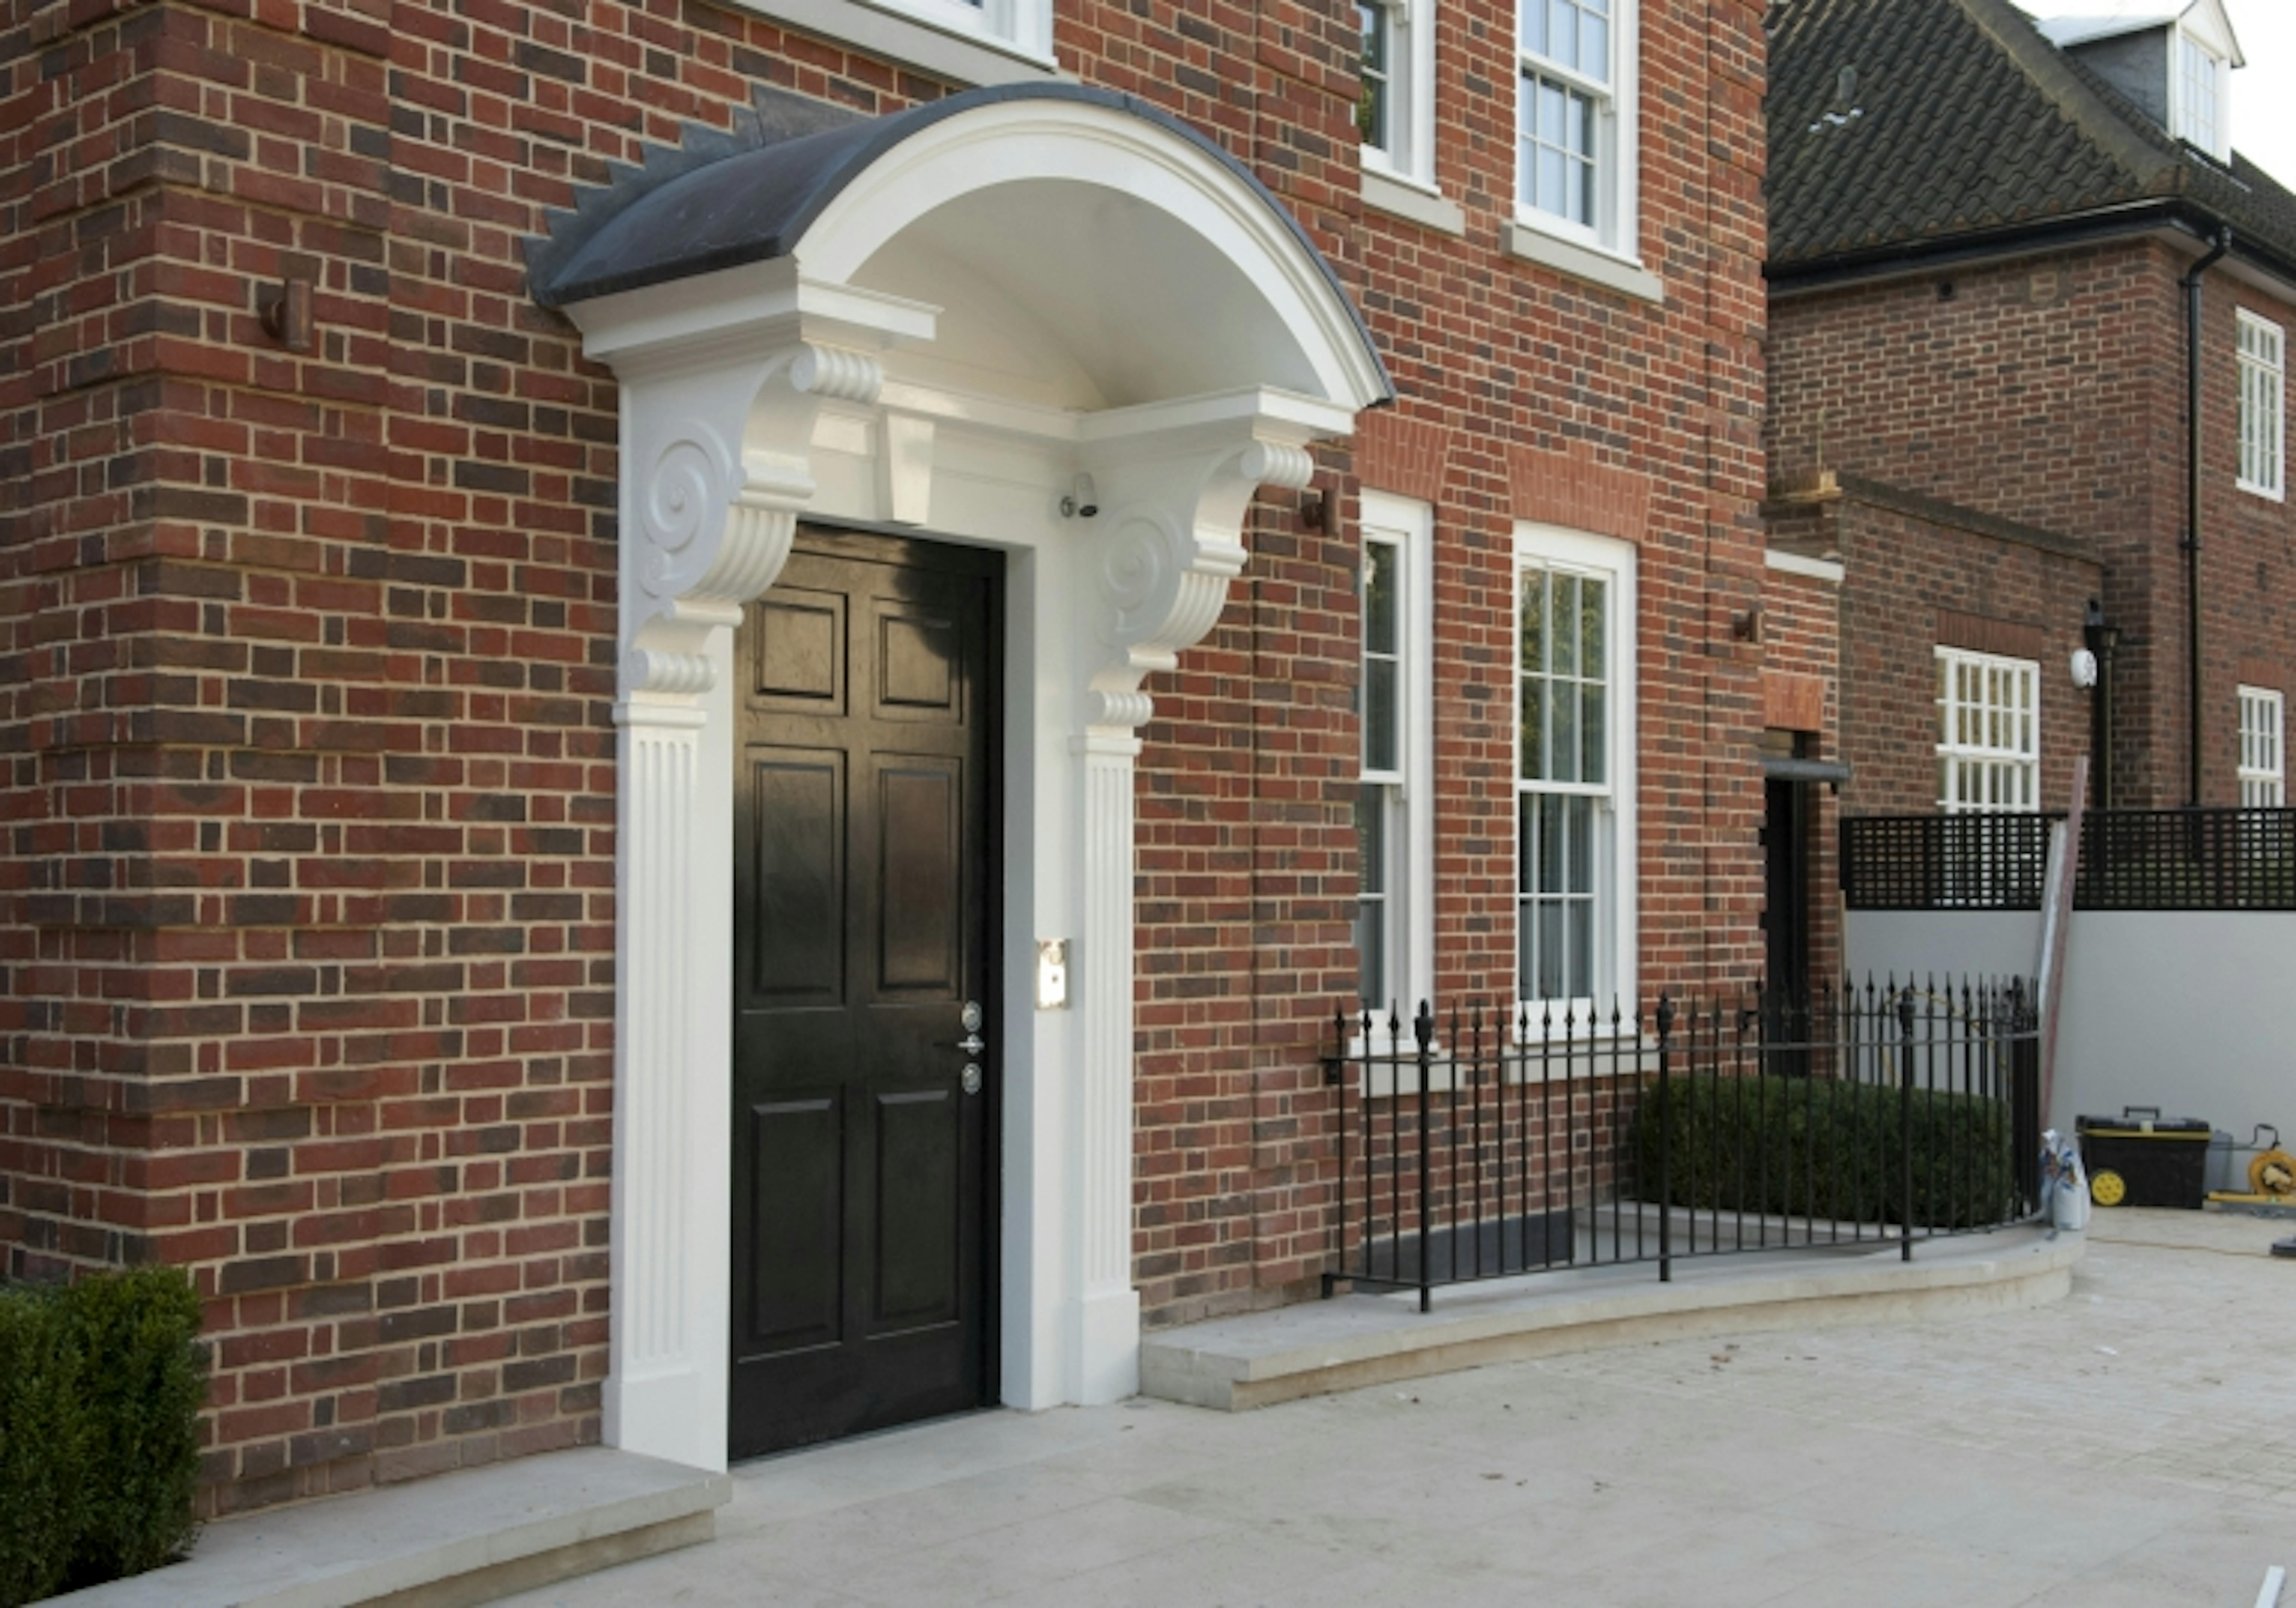 Red brick georgian style home featuring a classic 6 panel period style front door in a black painted finish by Deuren.